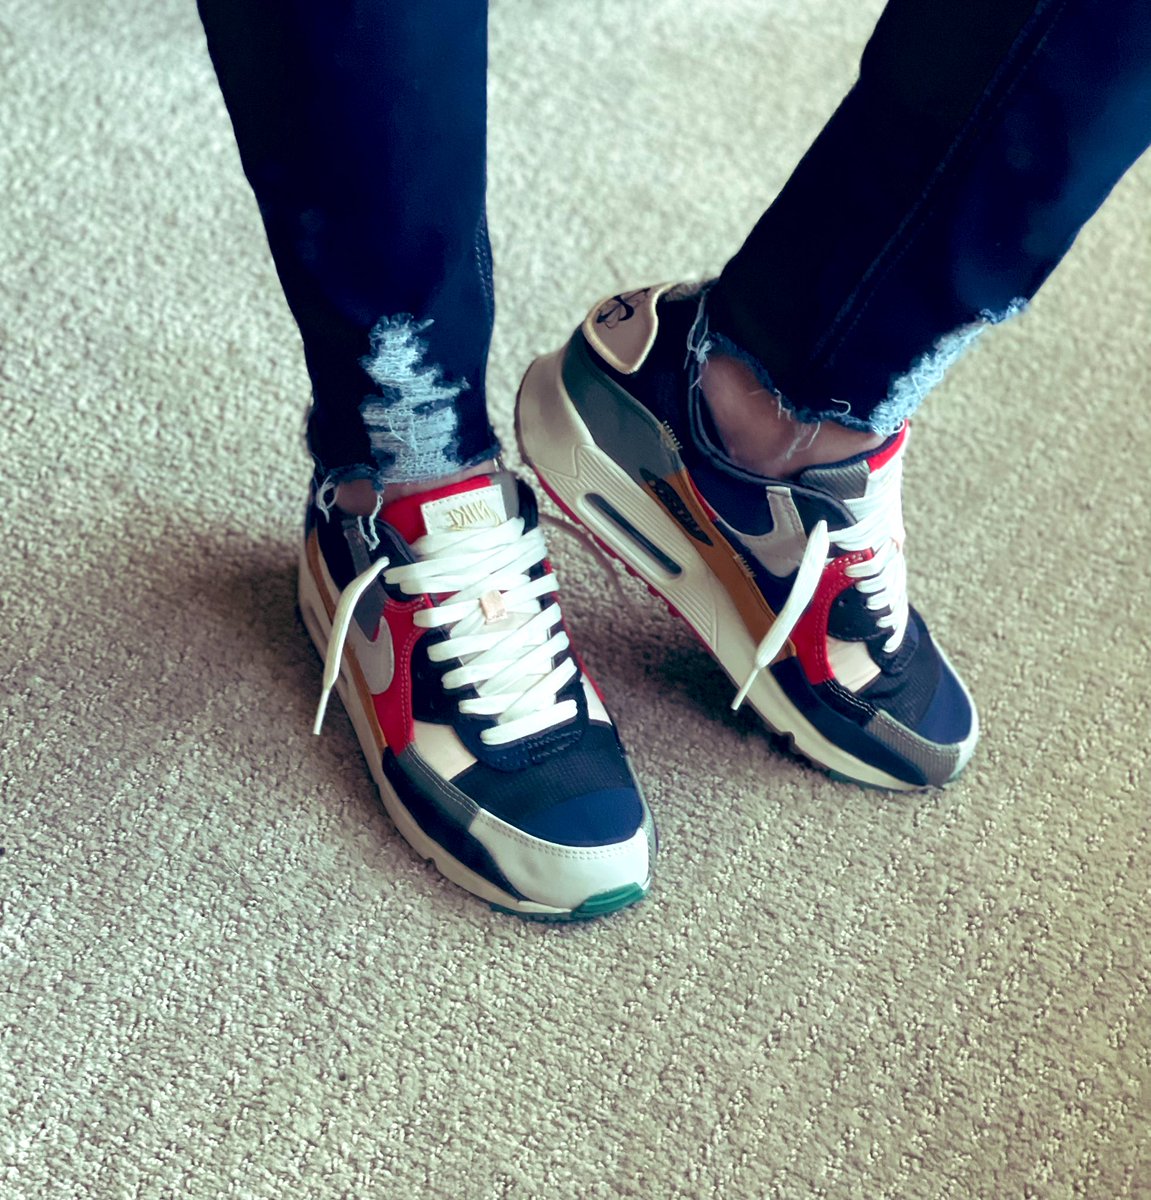 Today seemed like a fabulous in office day to UNDS these for #marchMAXness #KOTD #Nike #AirMax90 #femalesneakerhead